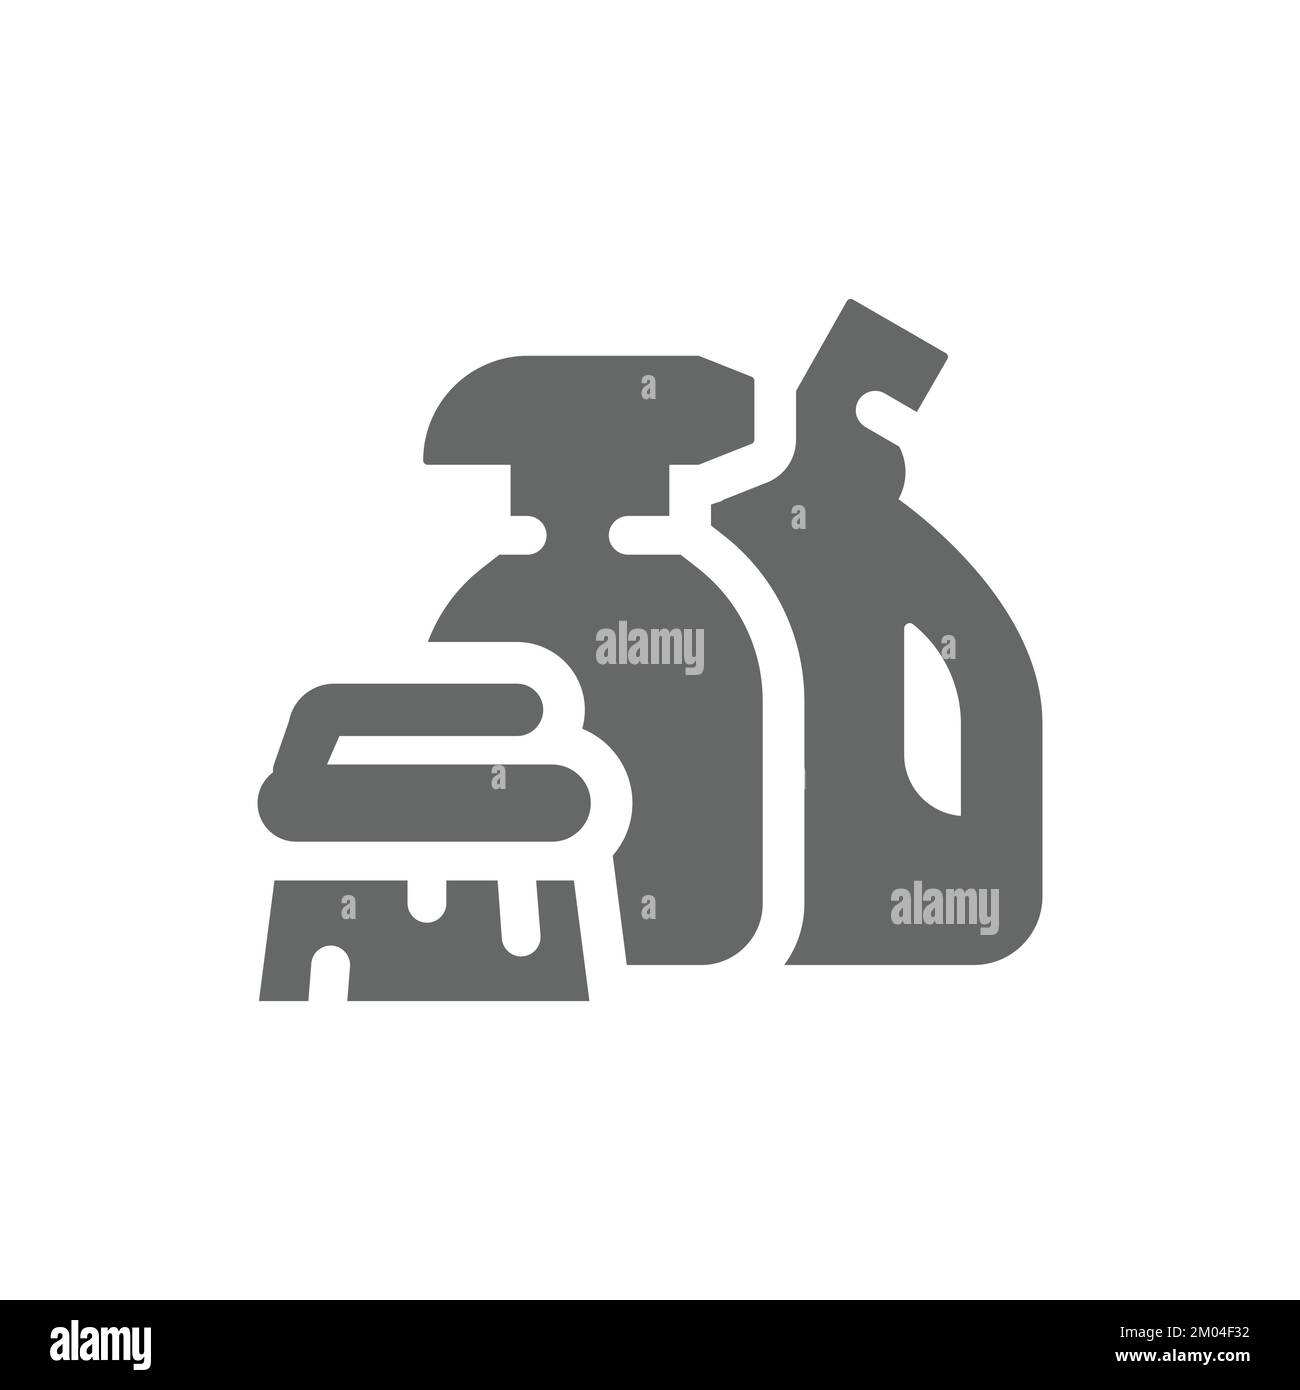 Cleaning supplies and products vector icon. Spray bottles, hygiene filled symbol. Stock Vector